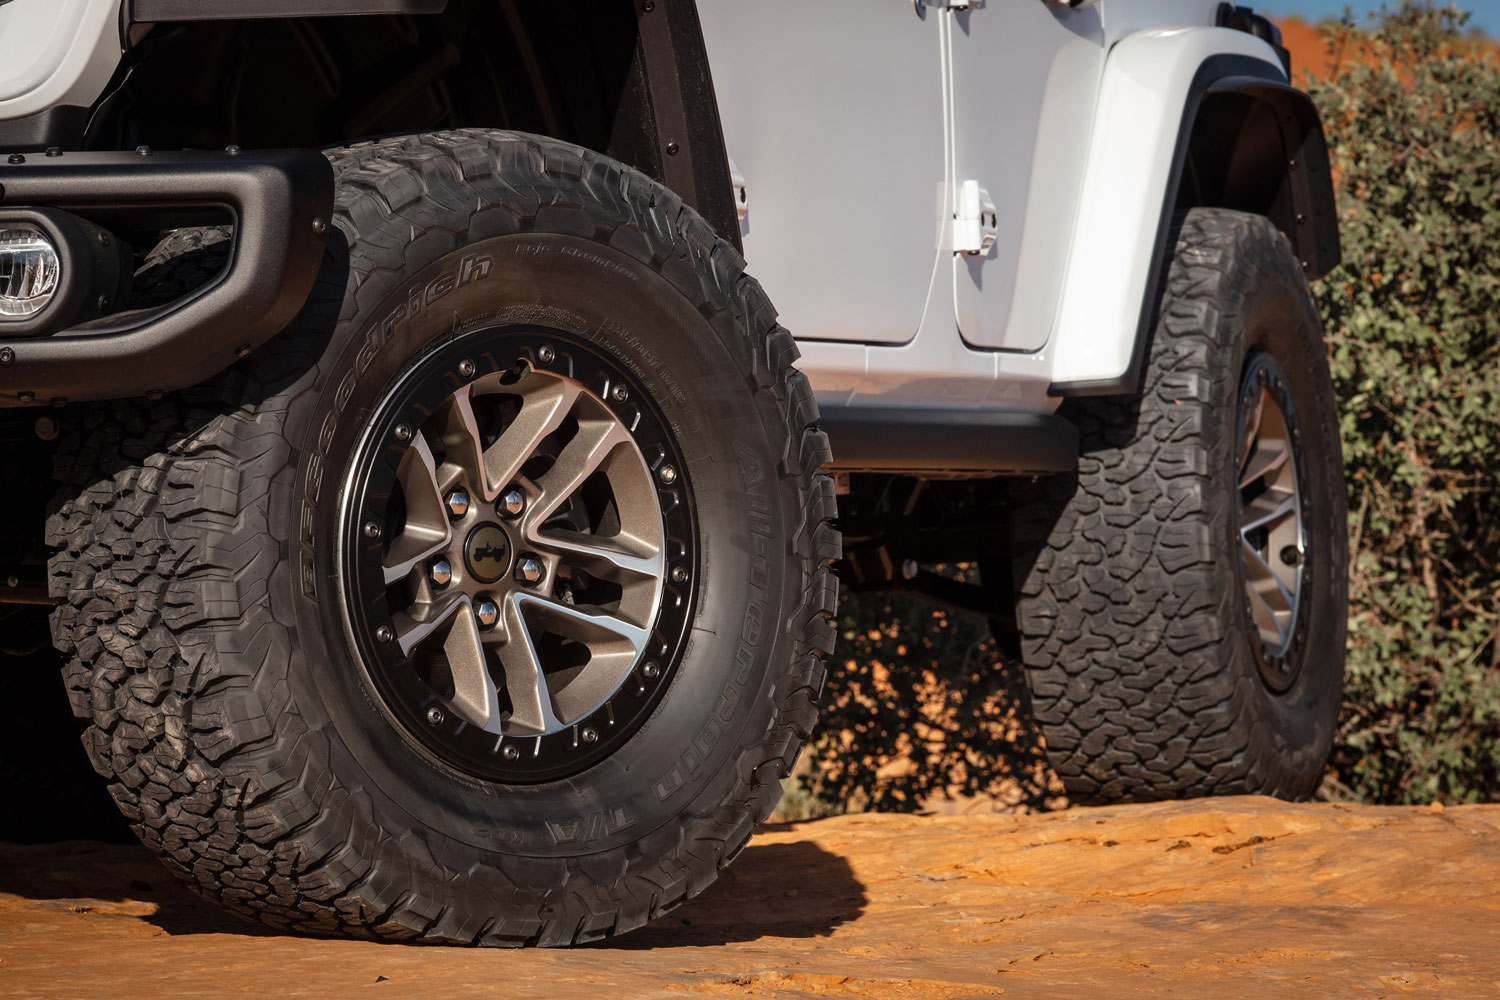 Close-up of Jeep Wrangler wheels and tires